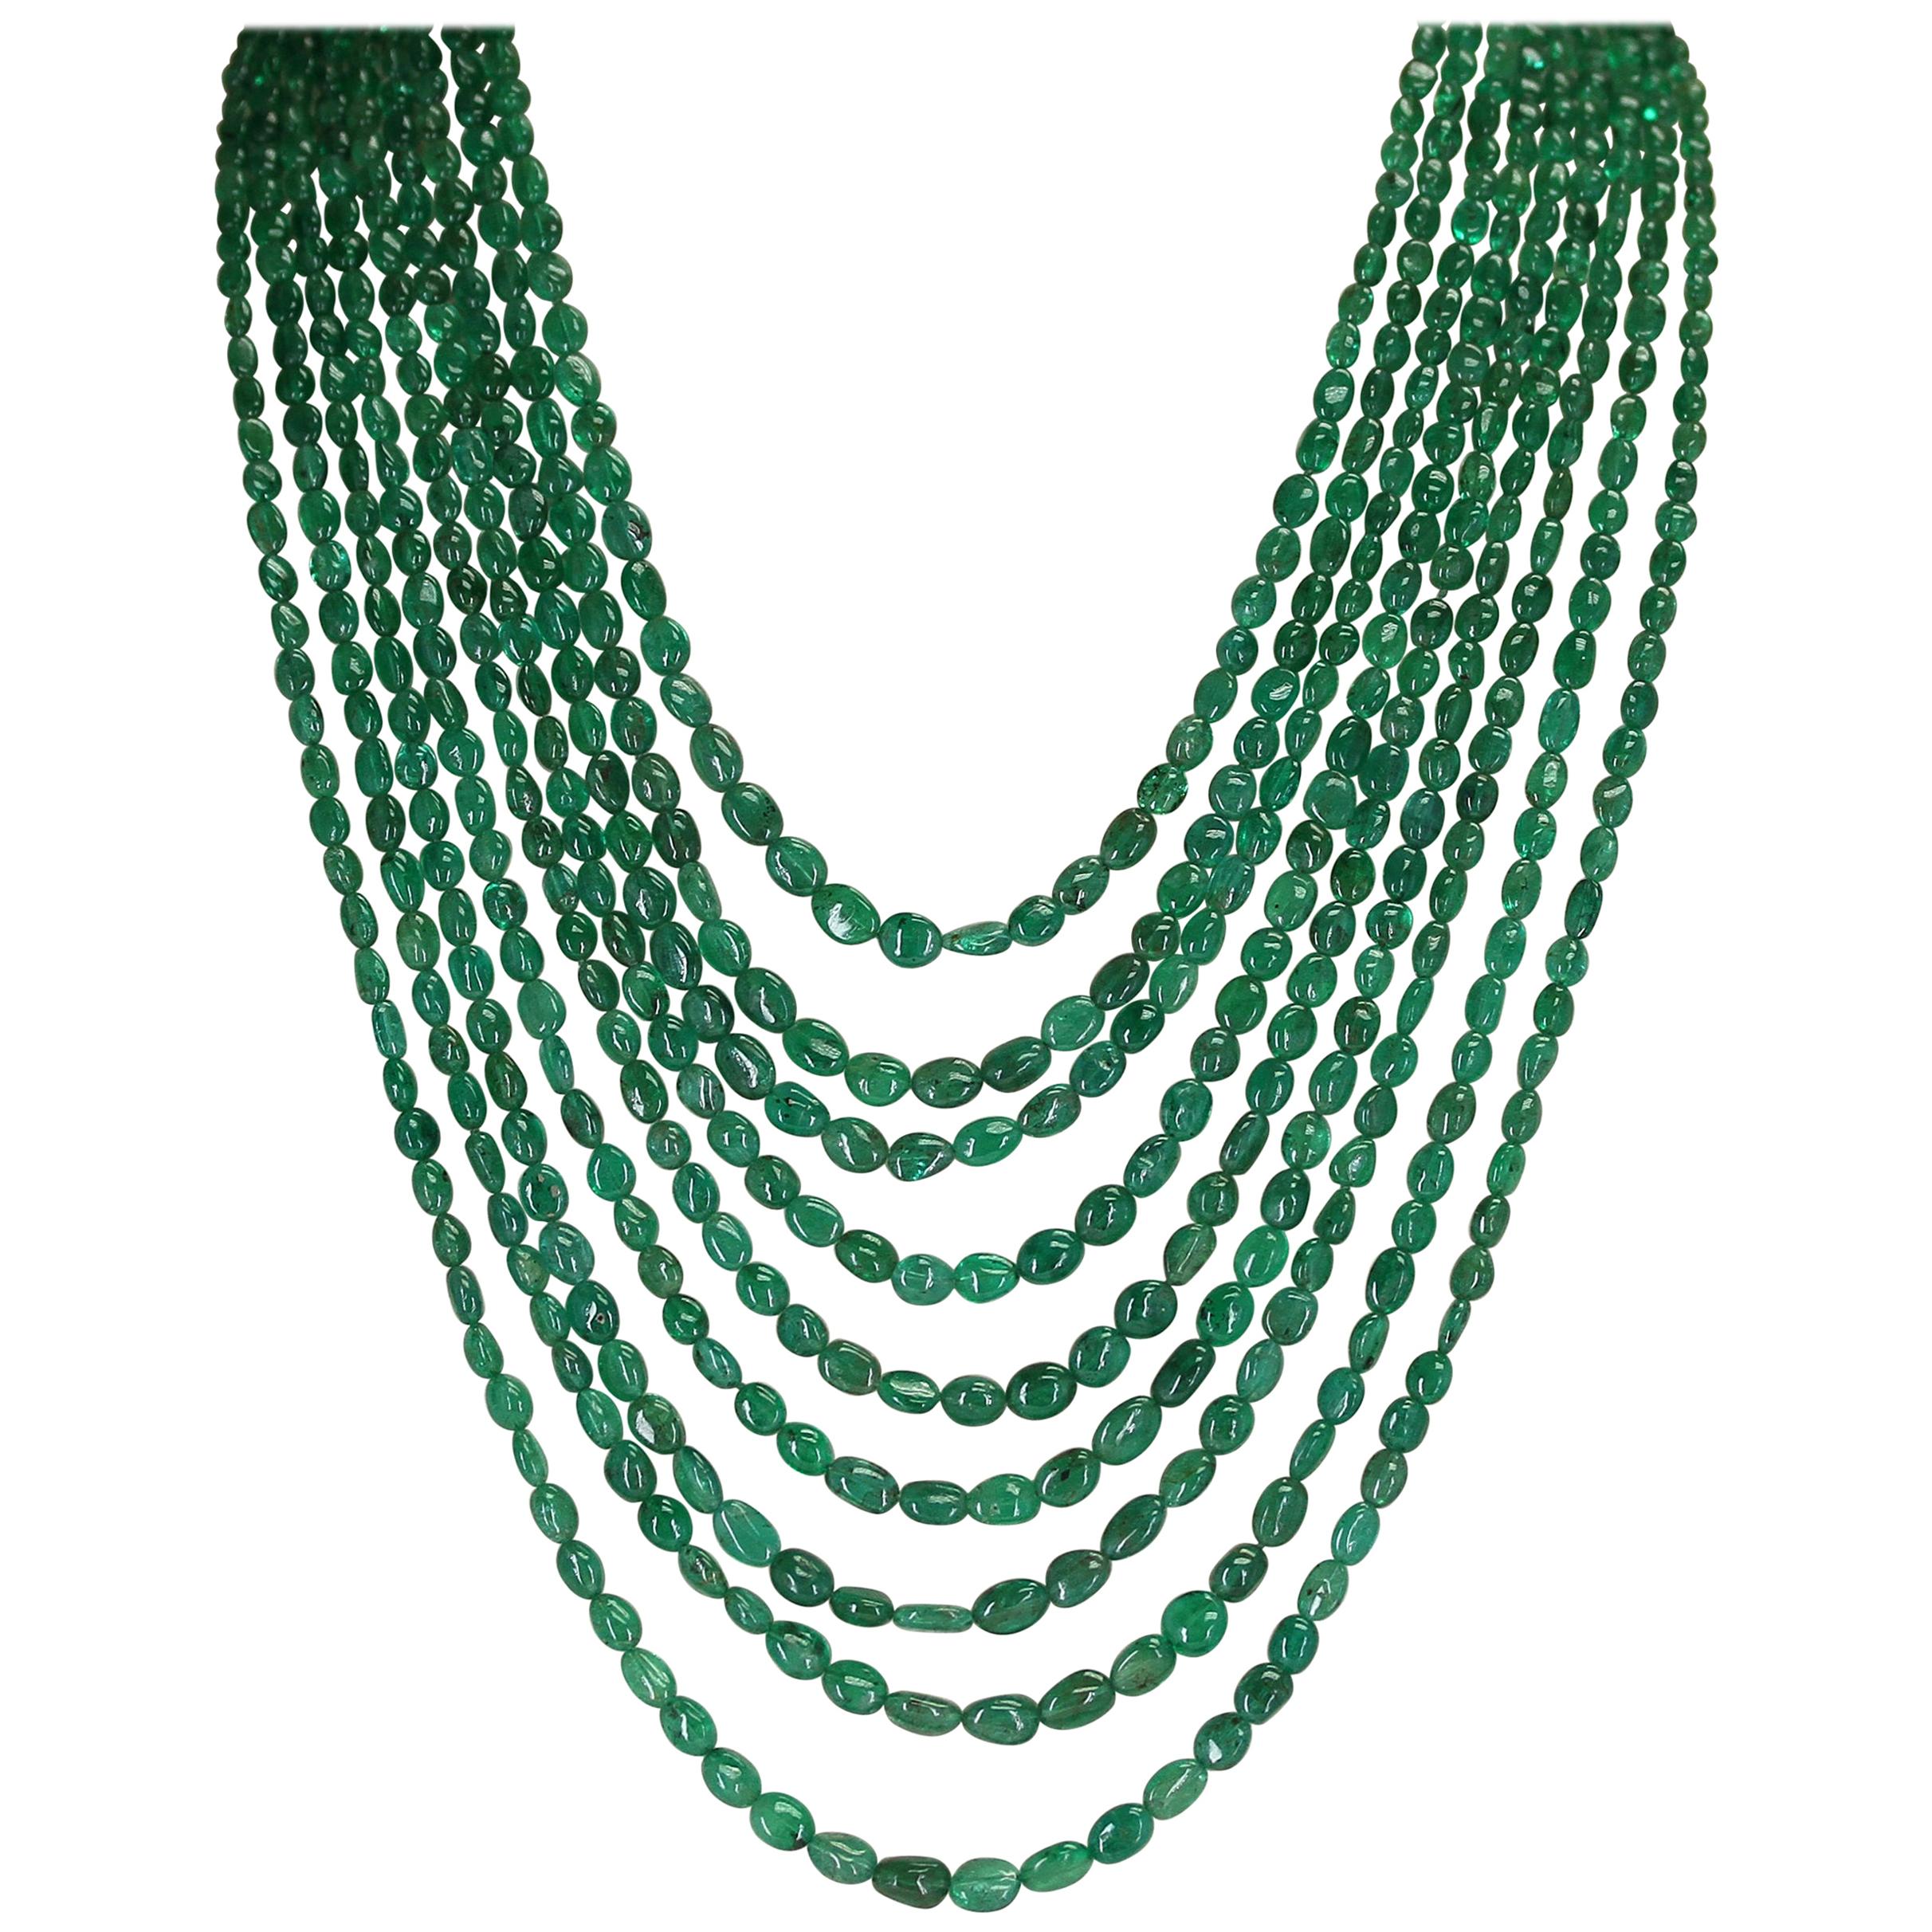 10mm Charming the Emerald Faceted Gemstone Necklace 18" PN675 